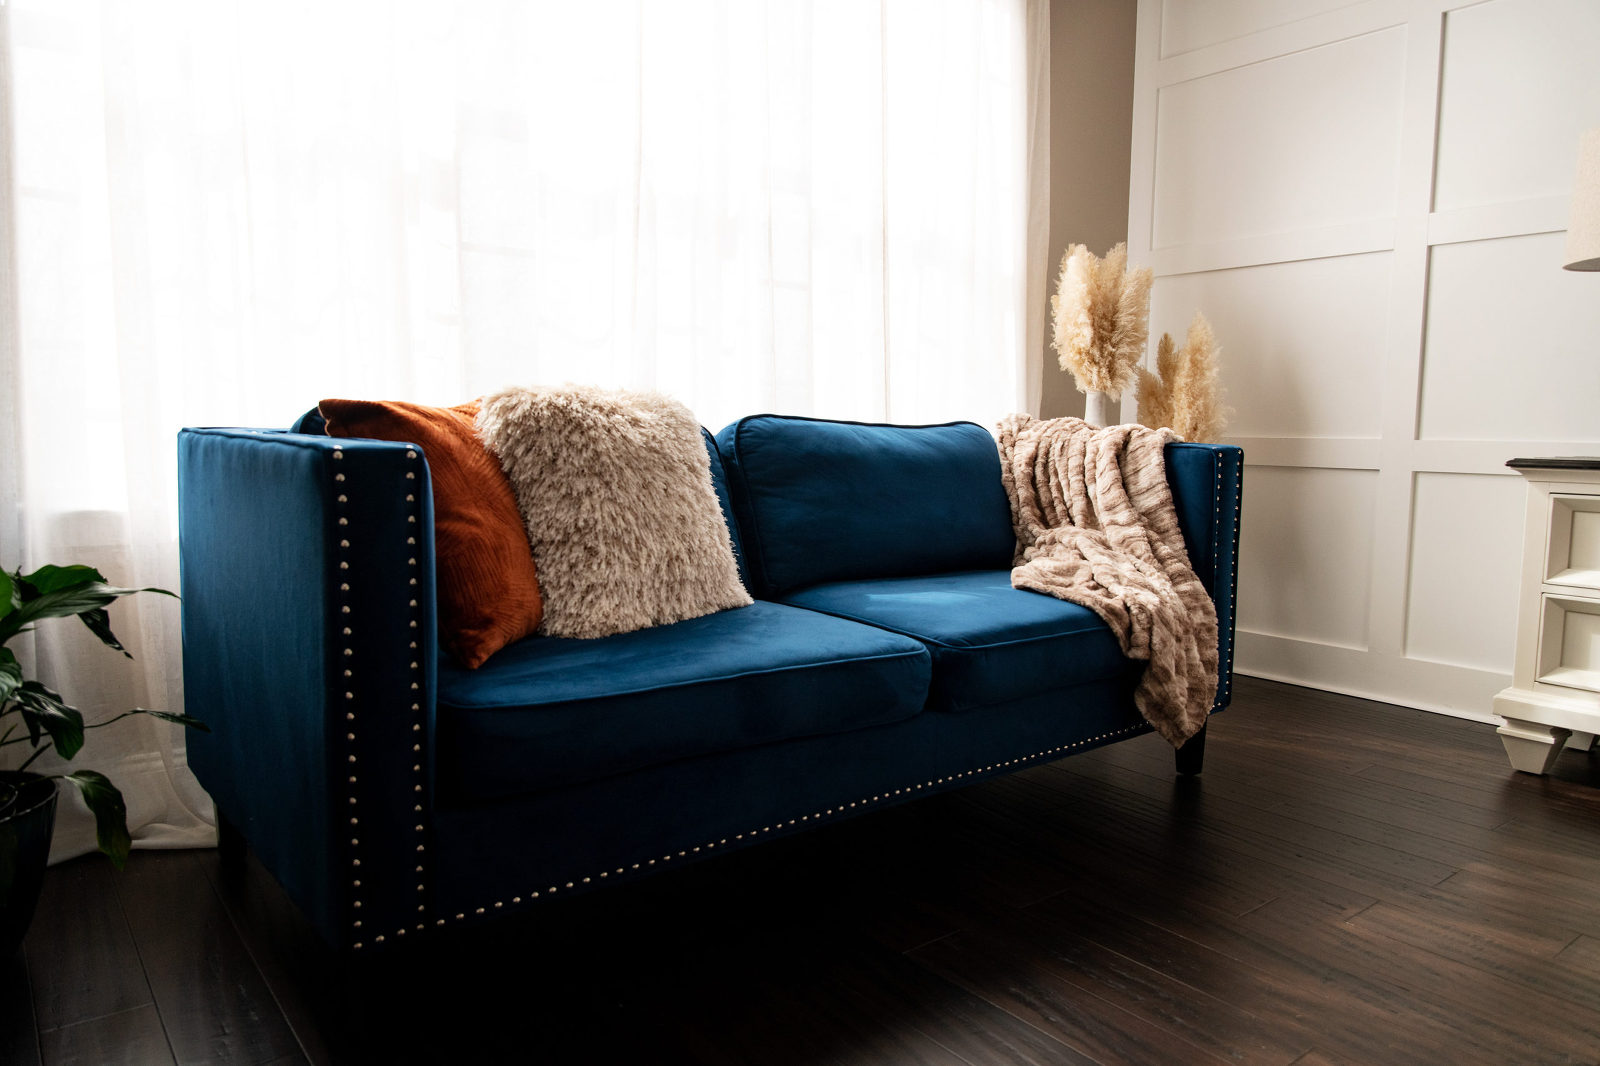 chattanooga boudoir studio with blue sofa, red king size bed, wood floors for an empowering photoshoot